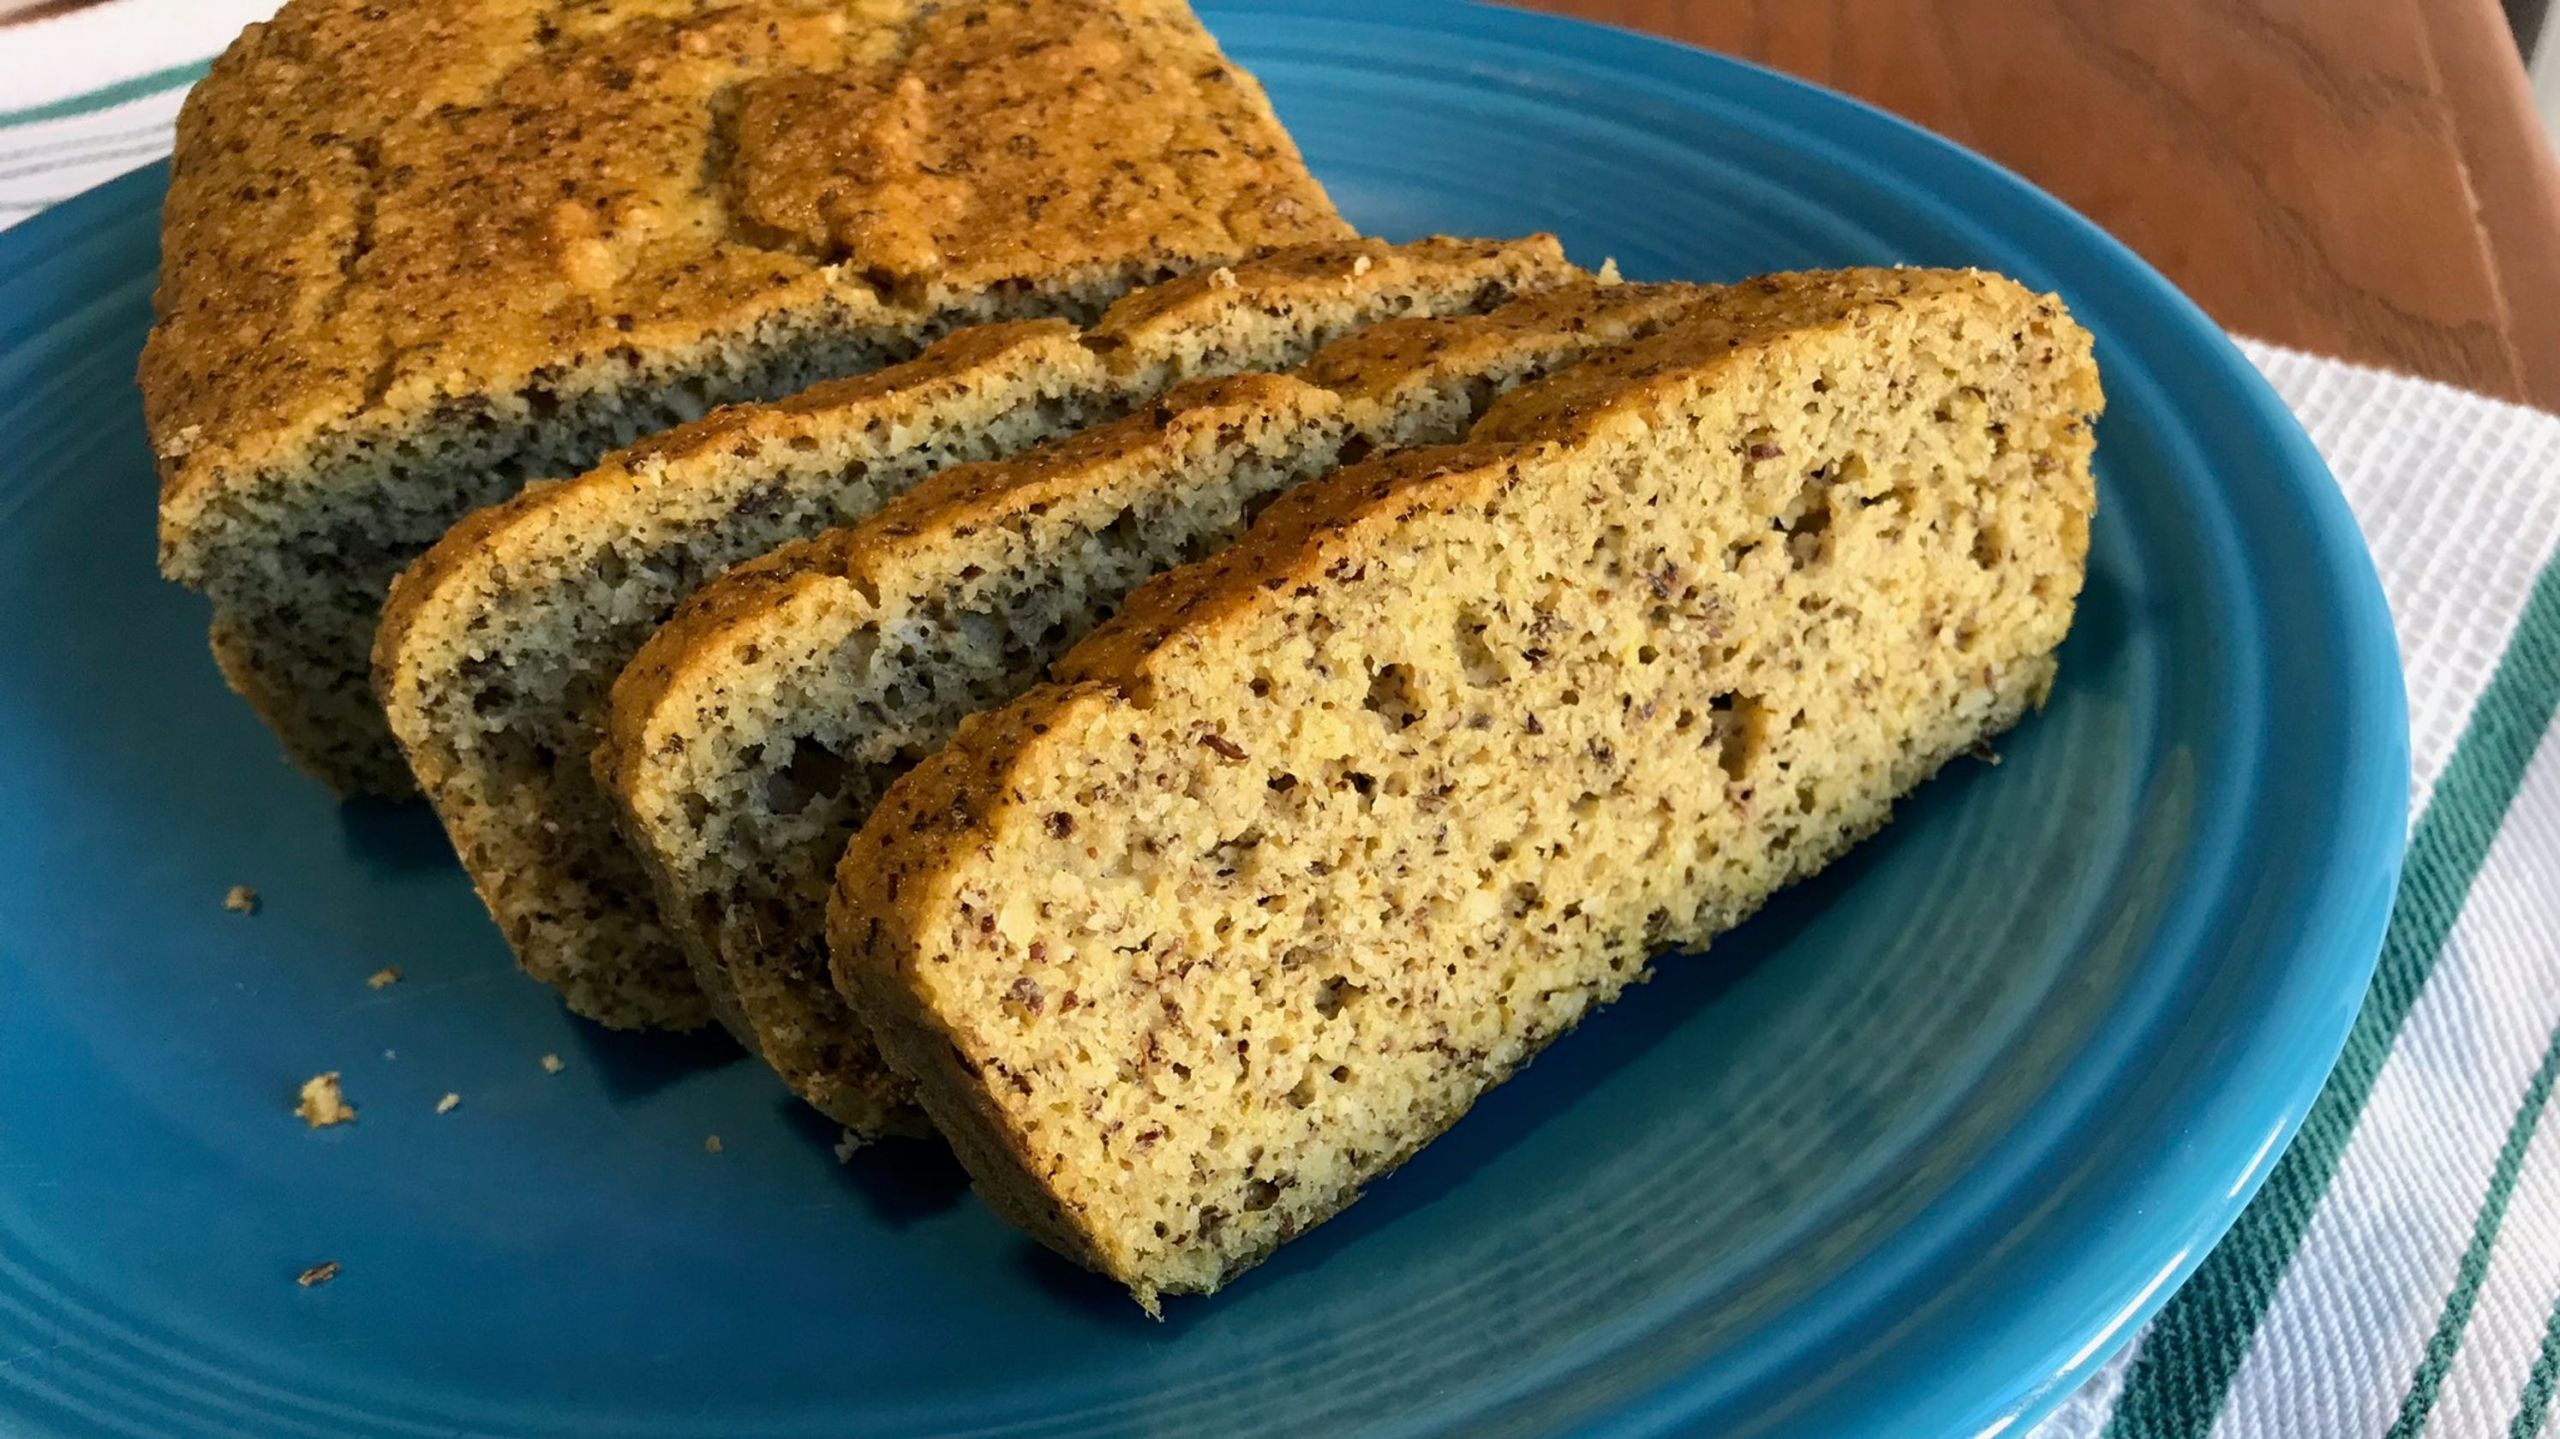 Carbohydrate Free Bread
 Low carb gluten free bread recipes are heroes for